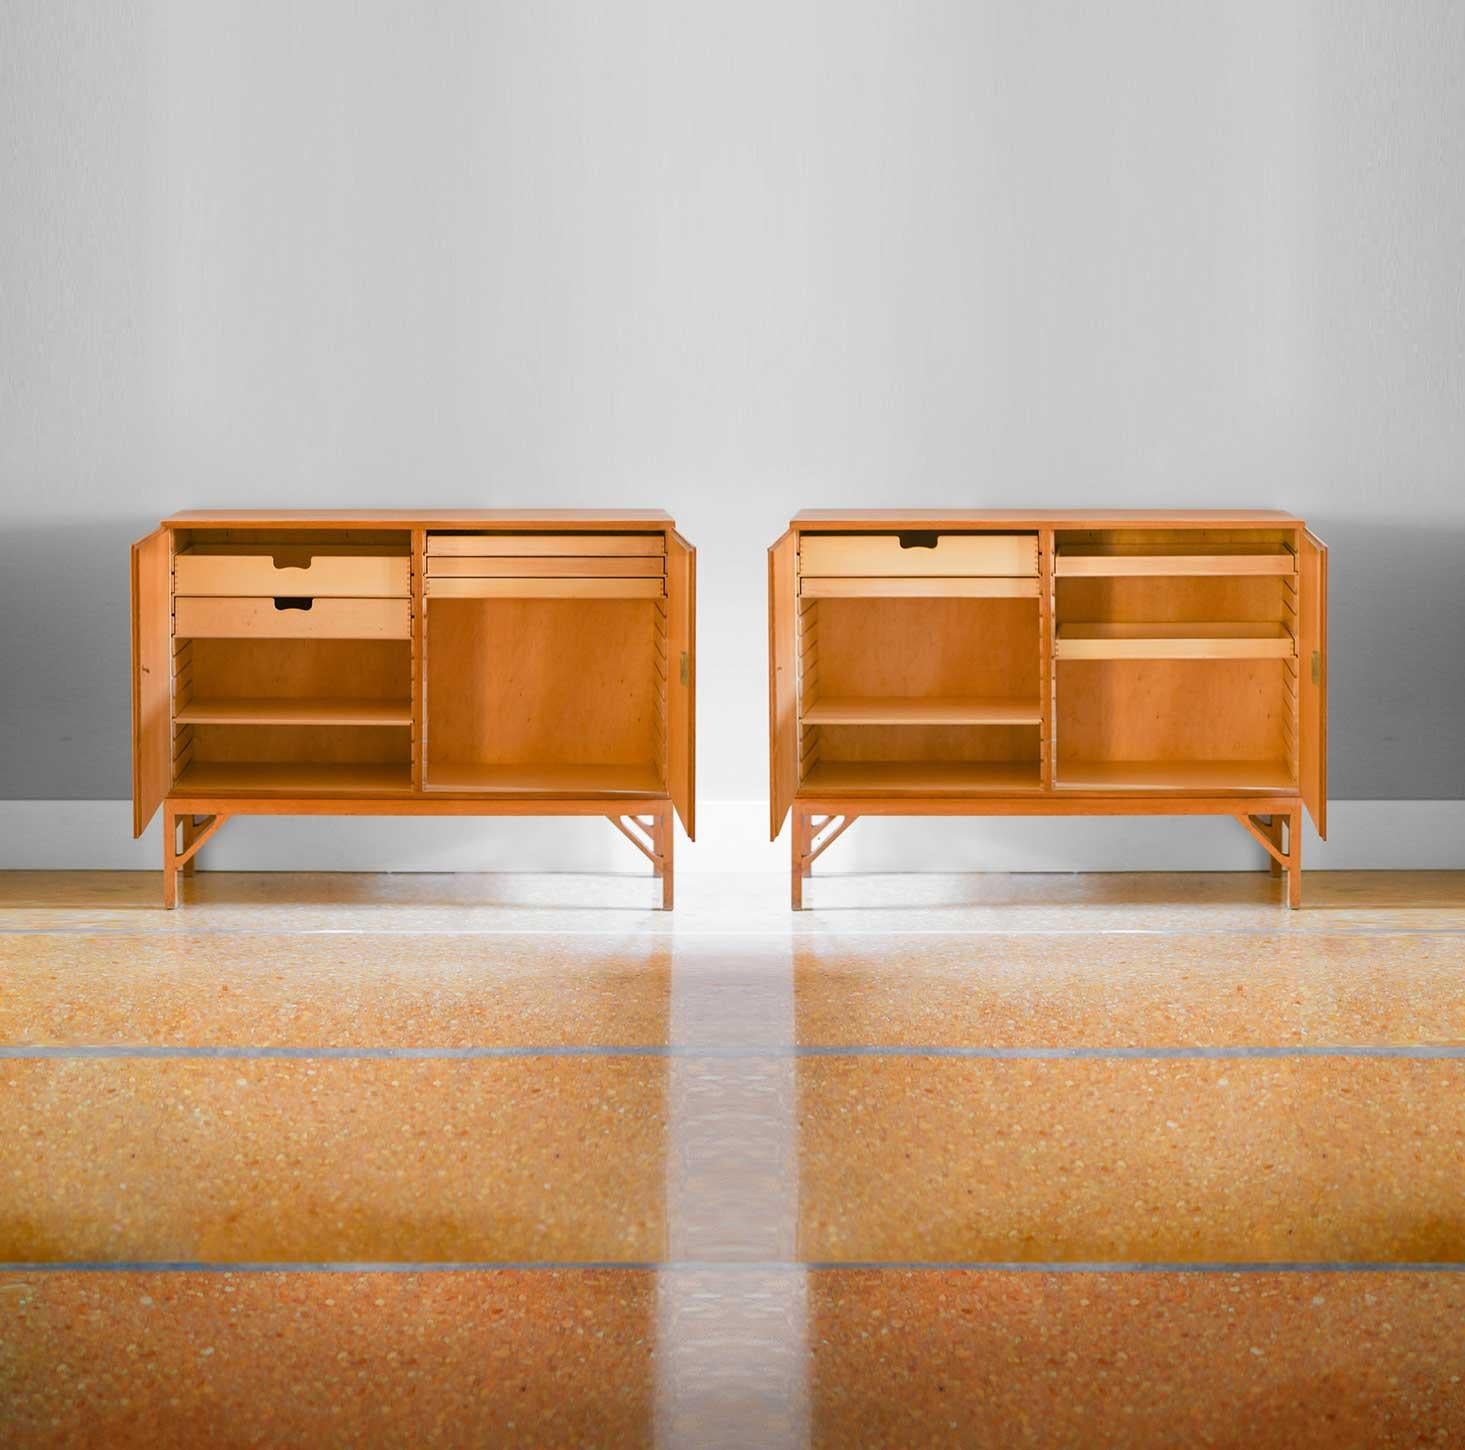 Pair of consoles China cabinet - Model, 232 by Borge Morgensen Prod. FDB Mobler.
Made of oak wood with 1960s brass details.
Container unit with customizable internal shelves and drawers.